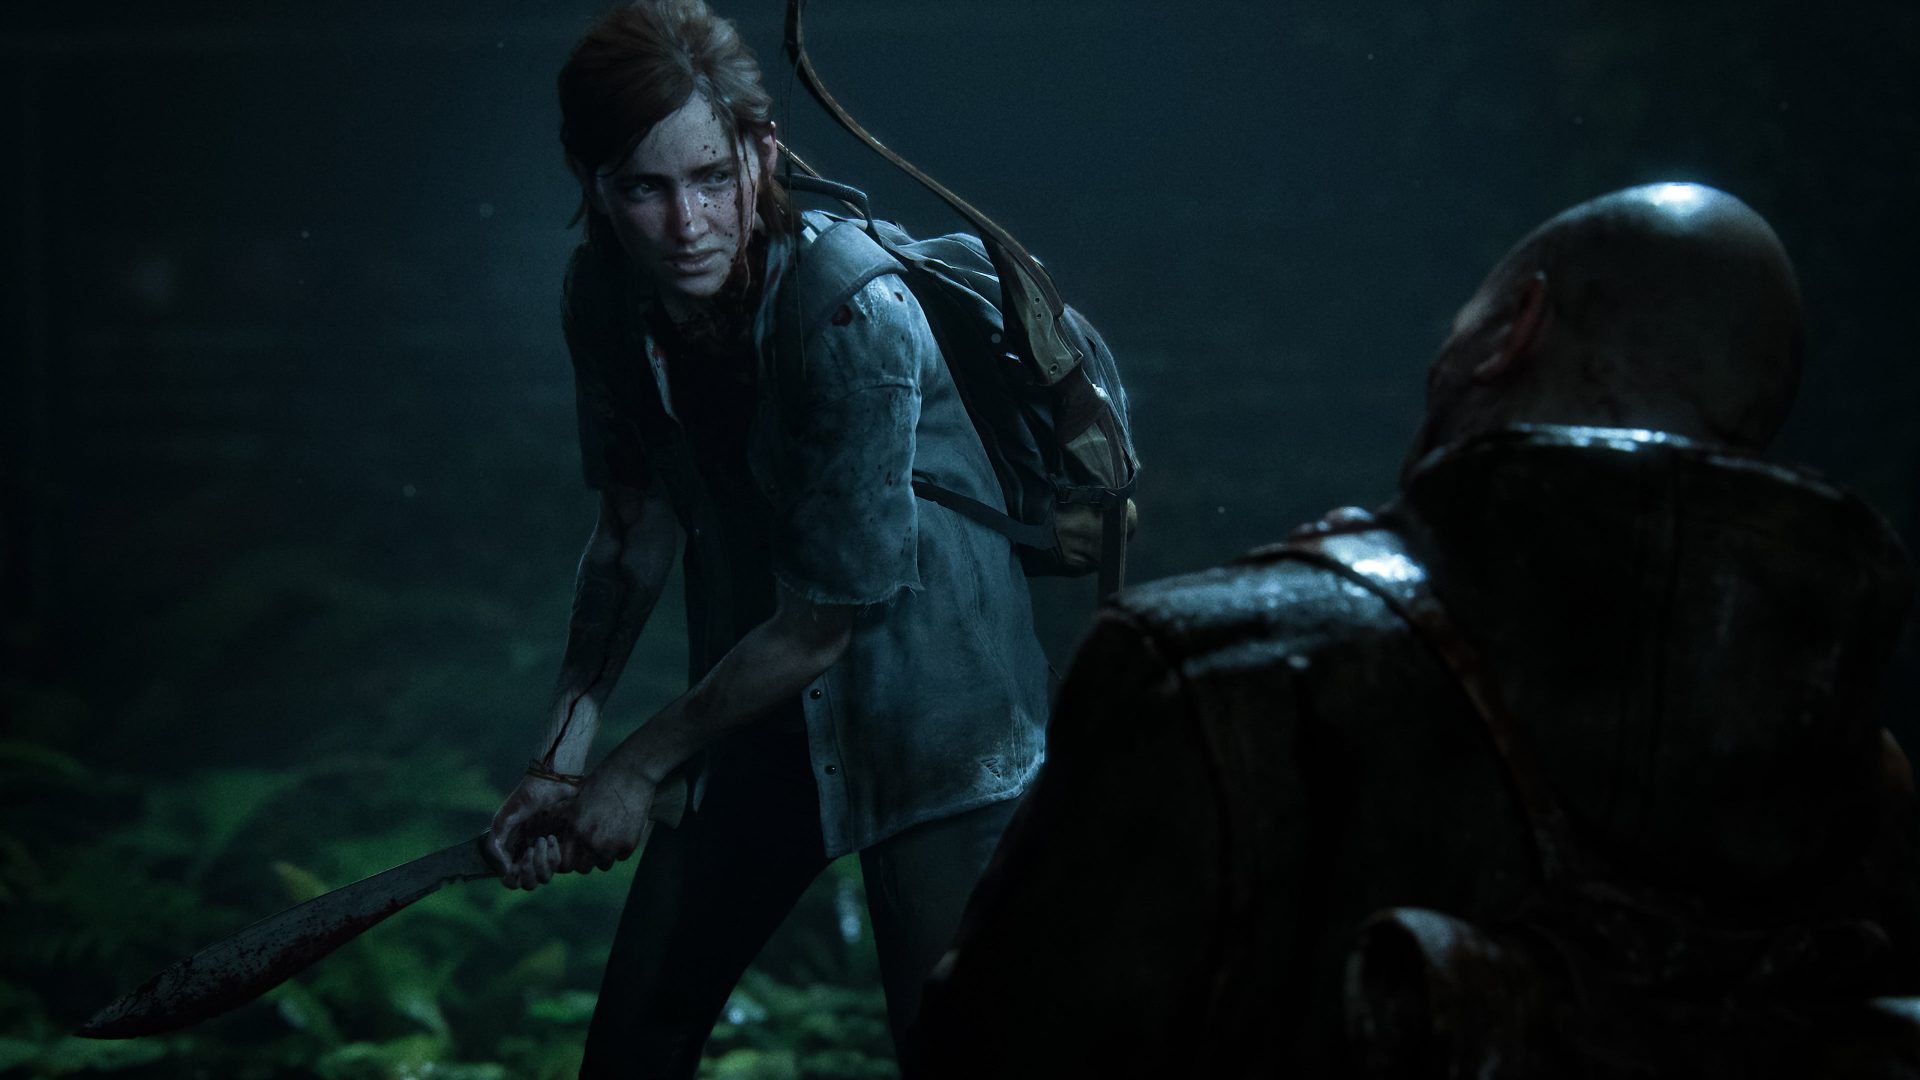 The Last of Us Part 2 writers have an outline for Part 3, but no